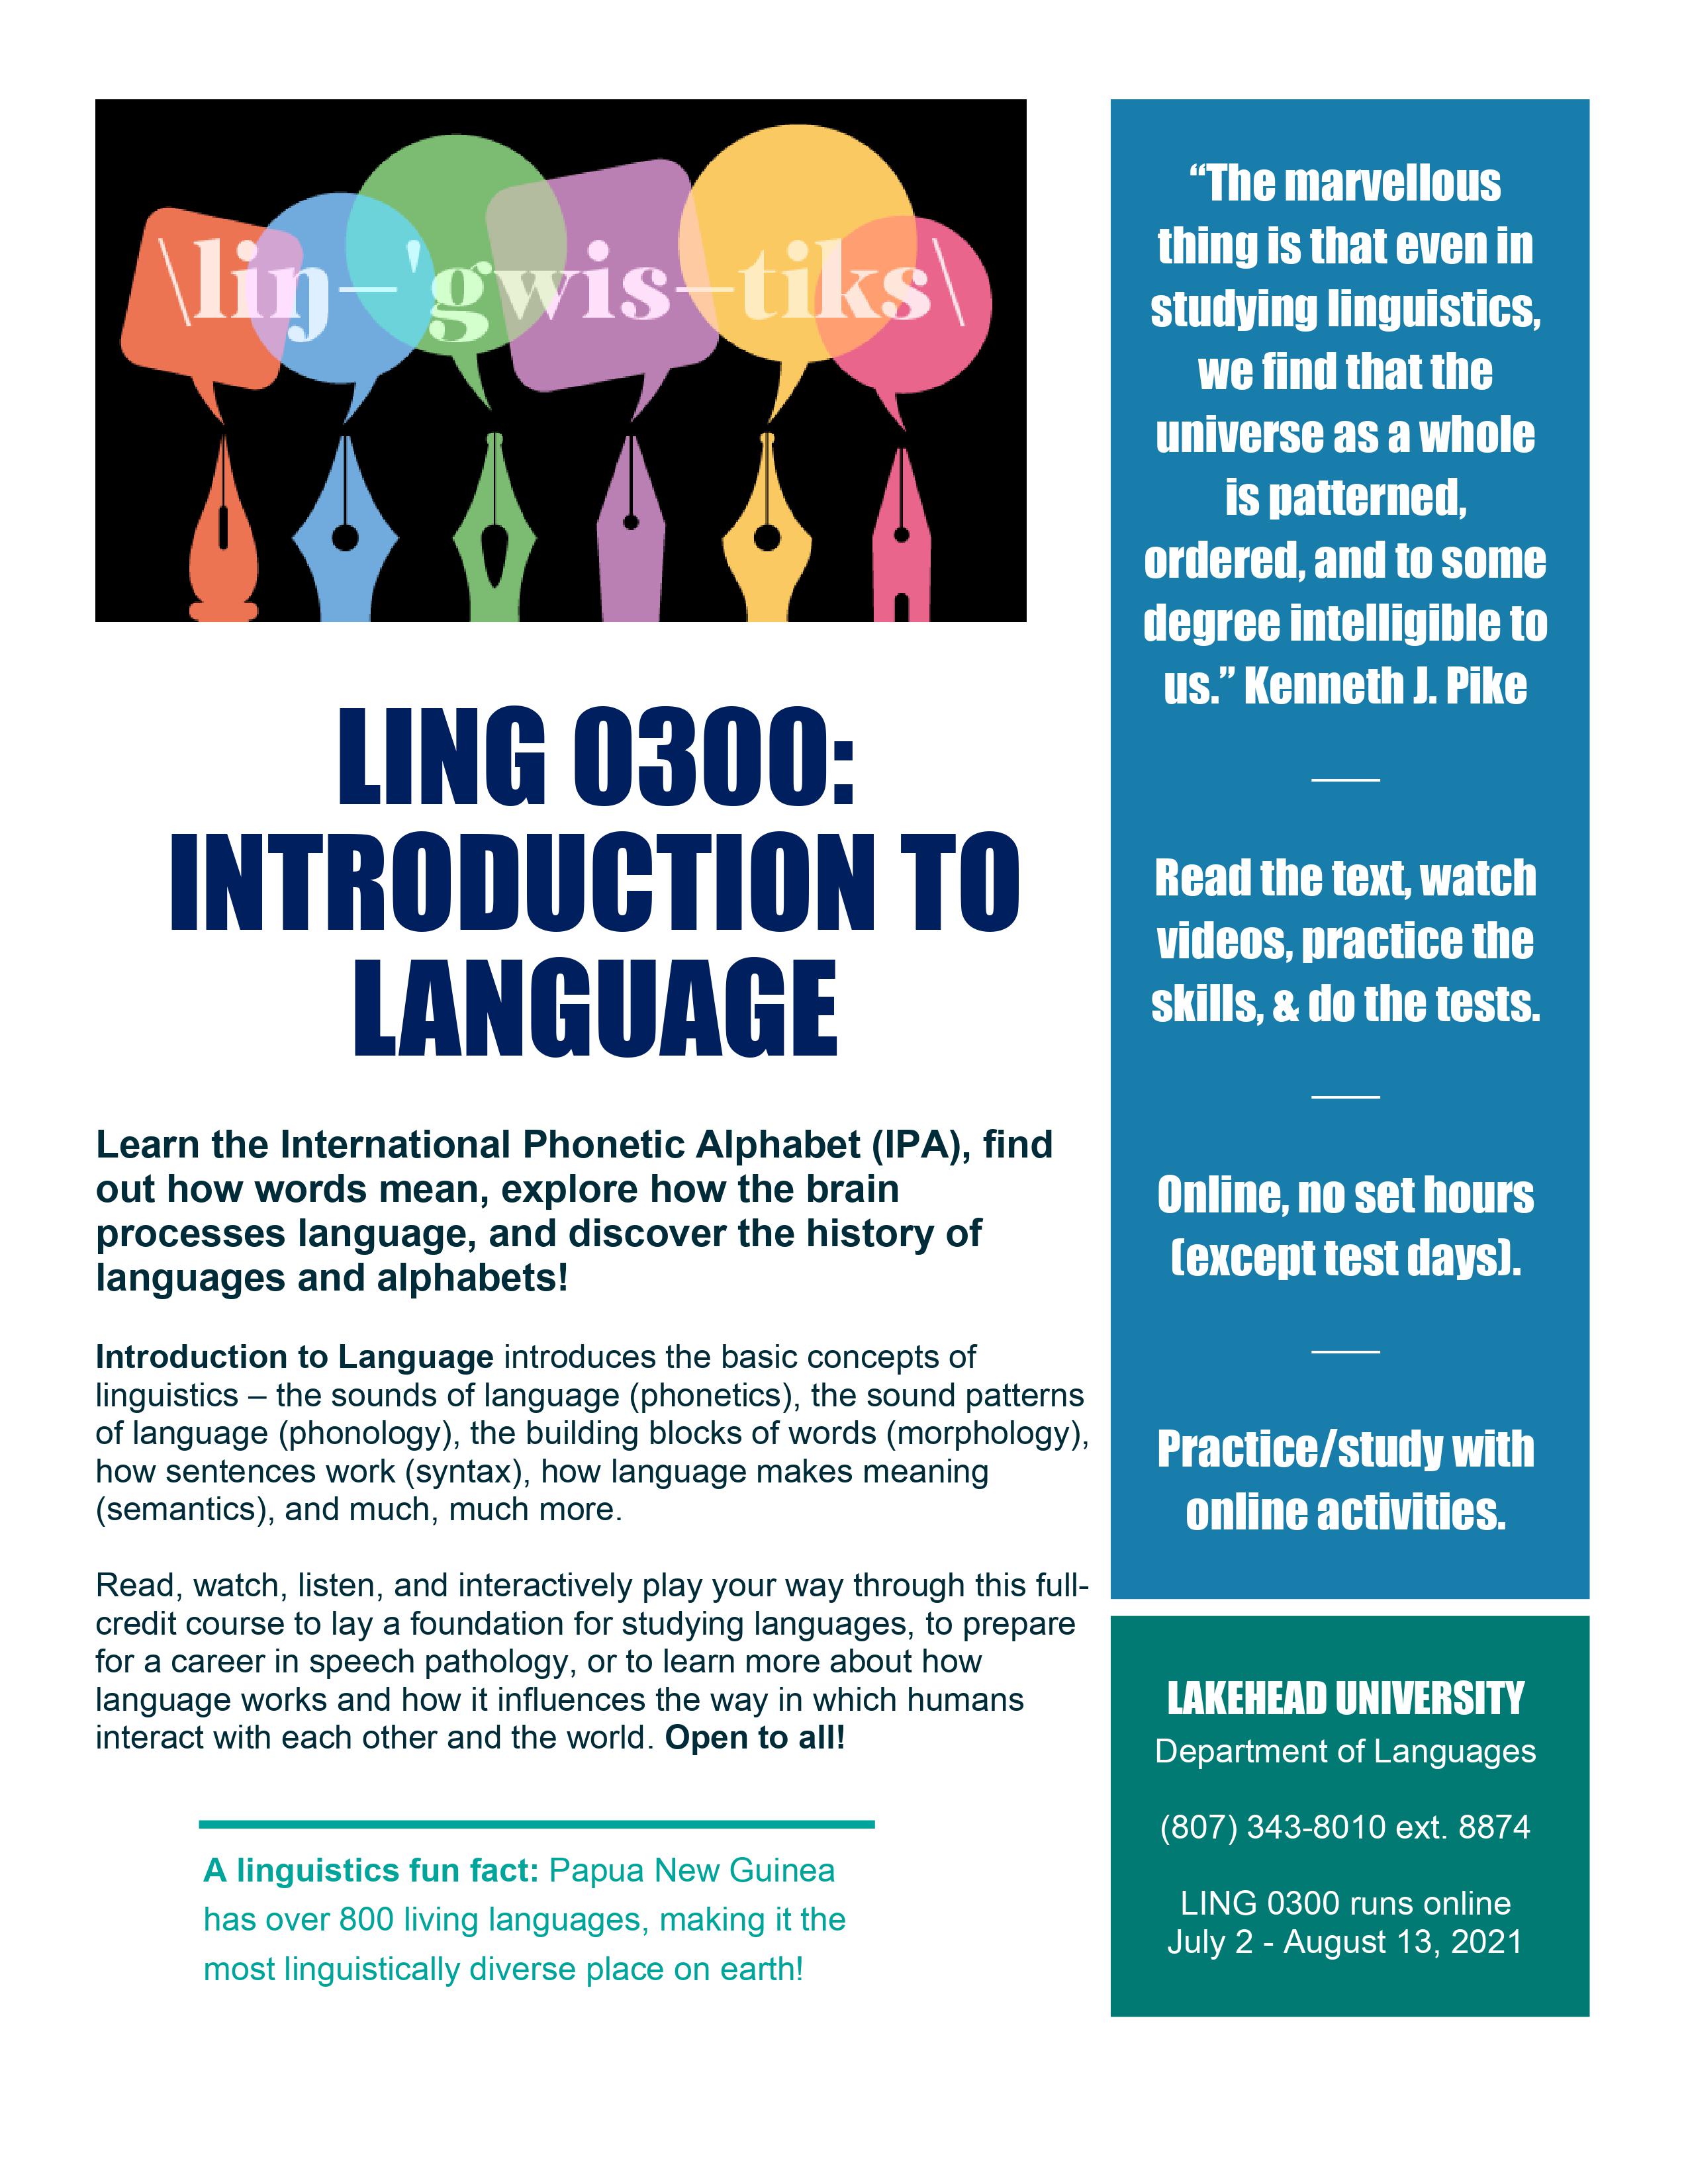 Learn the International Phonetic Alphabet (IPA), find out how words mean, explore how the brain processes language, and discover the history of languages and alphabets!   Introduction to Language introduces the basic concepts of linguistics – the sounds of language (phonetics), the sound patterns of language (phonology), the building blocks of words (morphology), how sentences work (syntax), how language makes meaning (semantics), and much, much more. Read, watch, listen, and interactively play your way through this full-credit course to lay a foundation for studying languages, to prepare for a career in speech pathology, or to learn more about how language works and how it influences the way in which humans interact with each other and the world. Open to all! A linguistics fun fact: Papua New Guinea has over 800 living languages, making it the most linguistically diverse place on earth! Following content is on the right hand-side of the poster: “The marvellous thing is that even in studying linguistics,  we find that the universe as a whole is patterned, ordered, and to some degree intelligible to us.” Kenneth J. Pike. Read the text, watch videos, practice the skills, & do the tests. Online, no set hours (except test days).  Practice/study with online activities. LAKEHEAD UNIVERSITY Department of Languages  (807) 343-8010 ext. 8874 LING 0300 runs online   July 2 - August 13, 2021